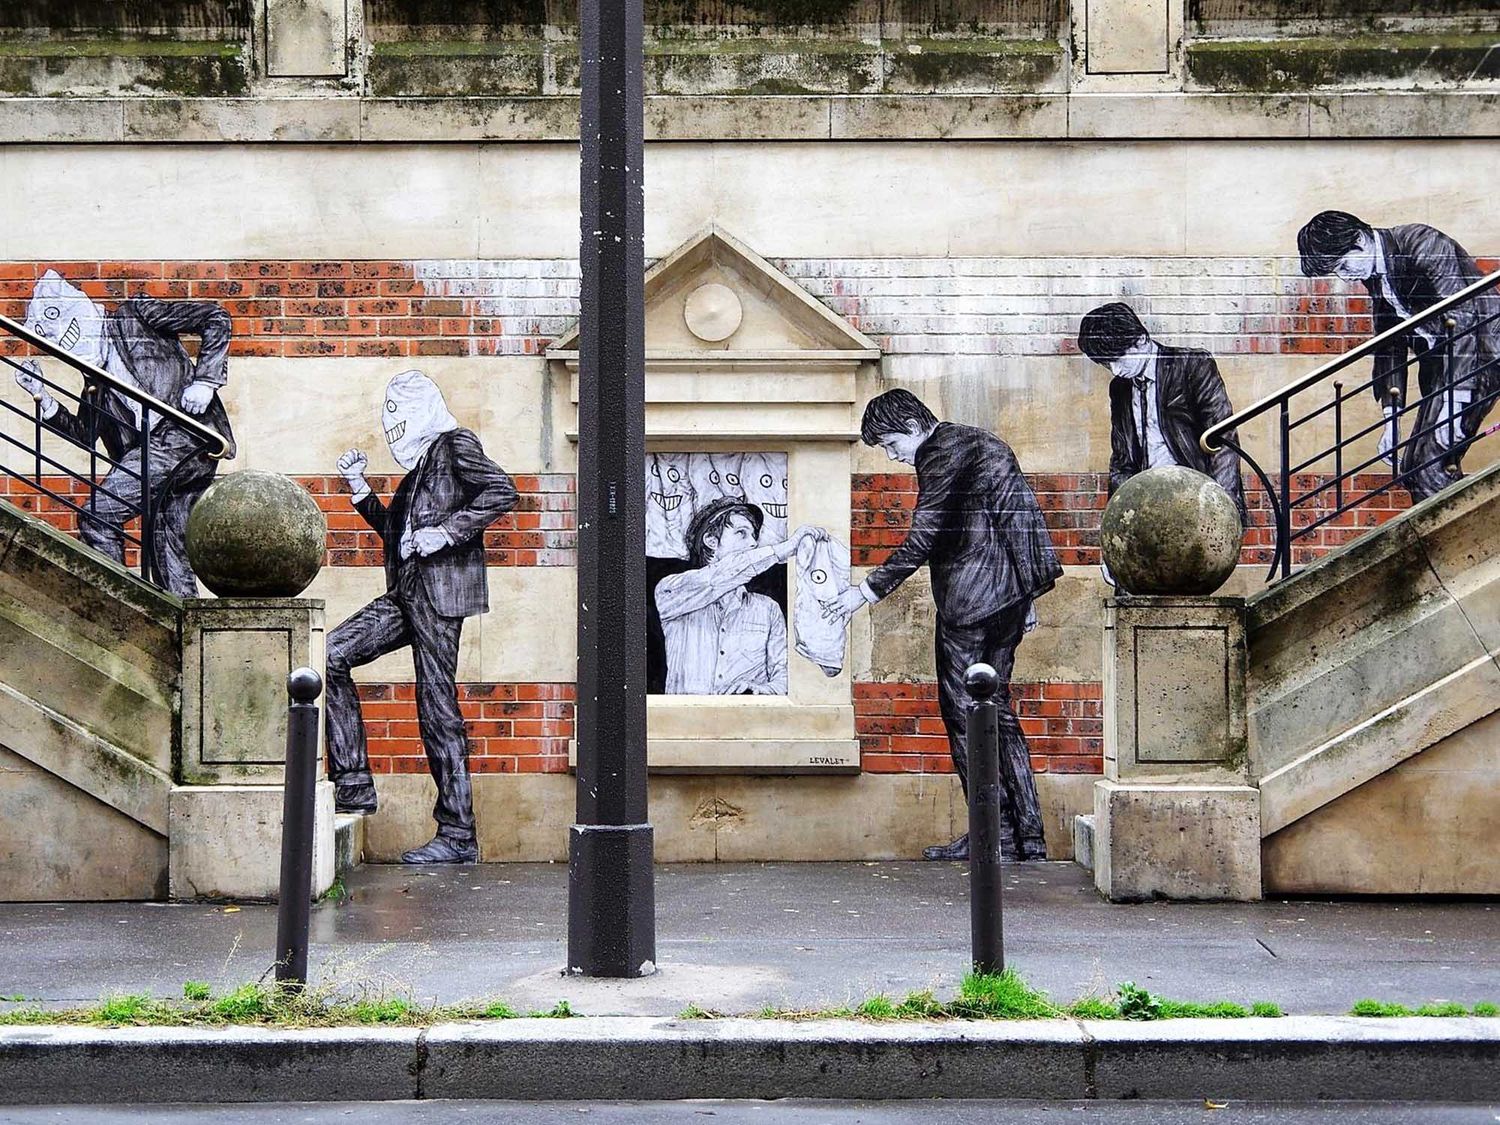 Along with stencil art, collage art is one of the most popular techniques used by urban artists today, such as the artist Levalet, who creates real scenes in the streets with his character (©Levalet).